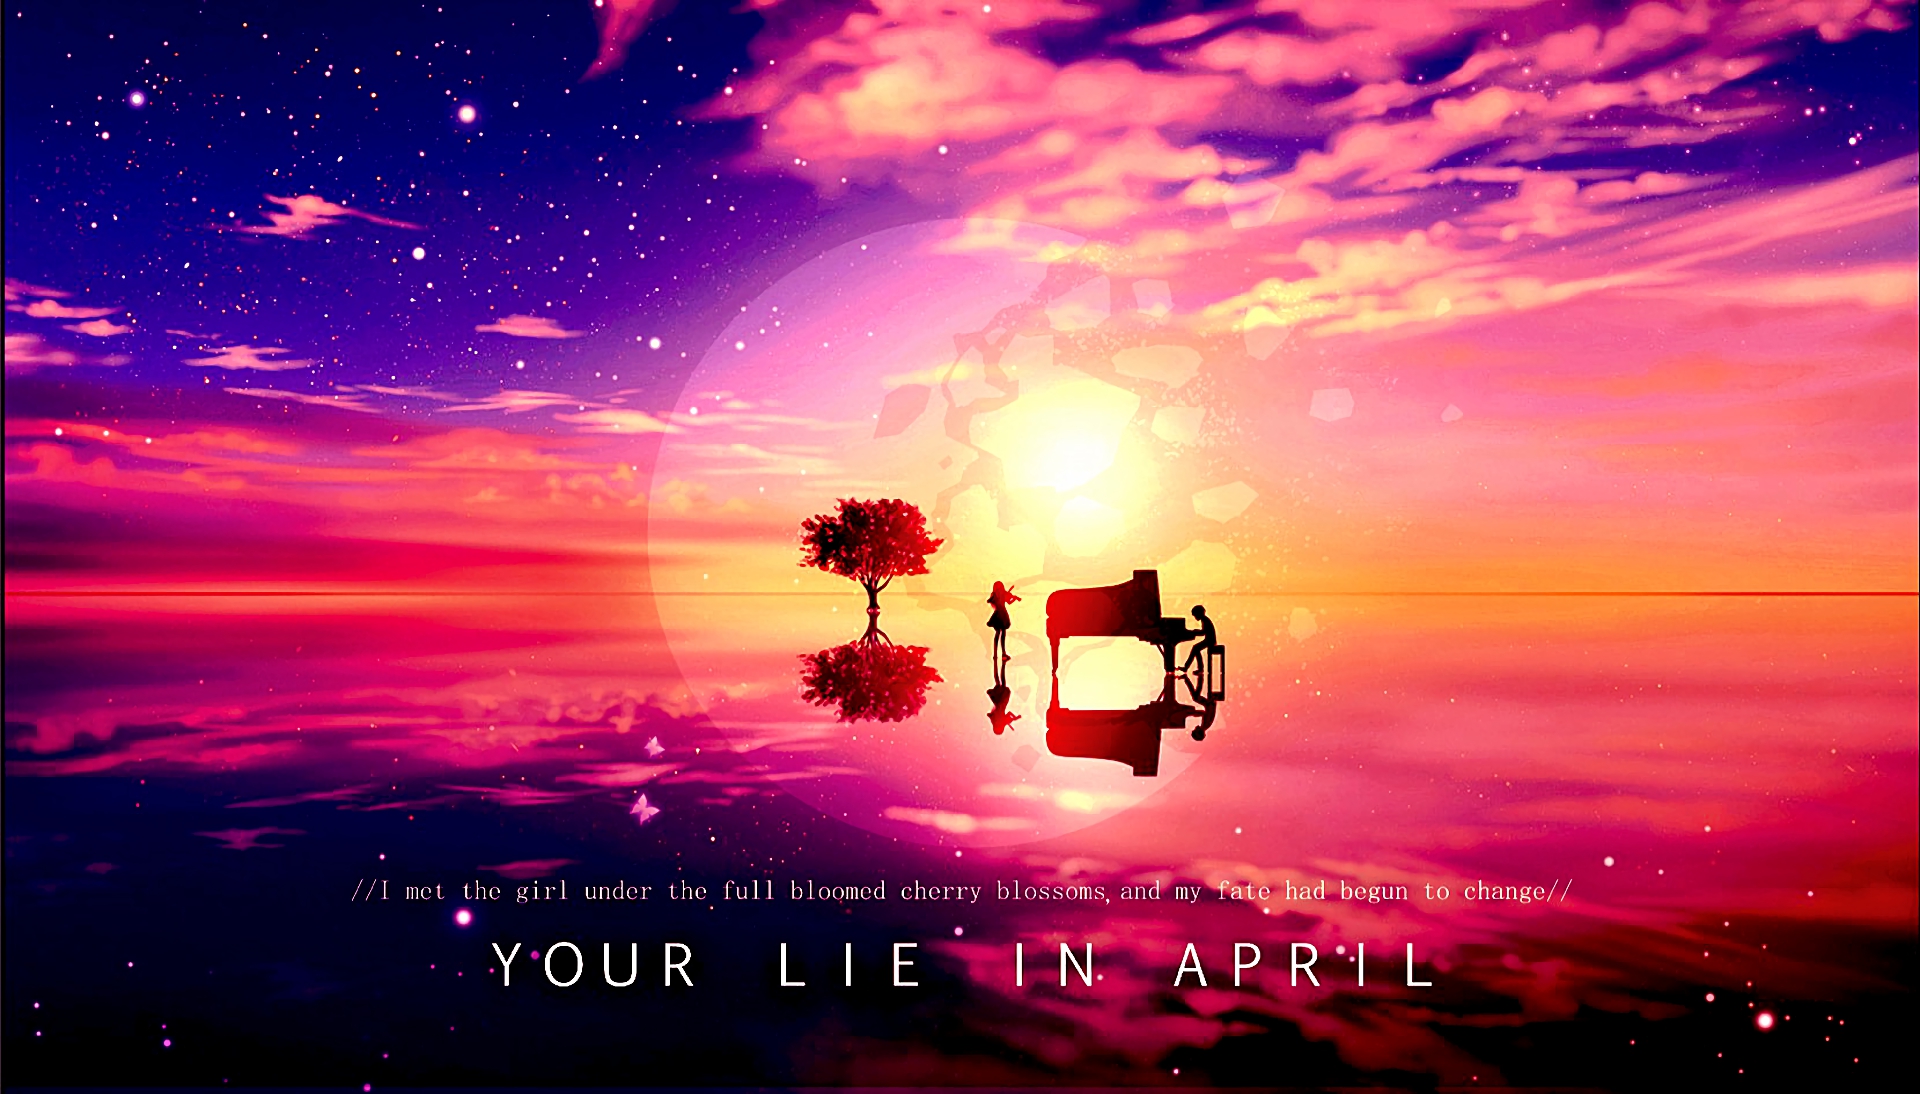 your lie in april live action eng sub download